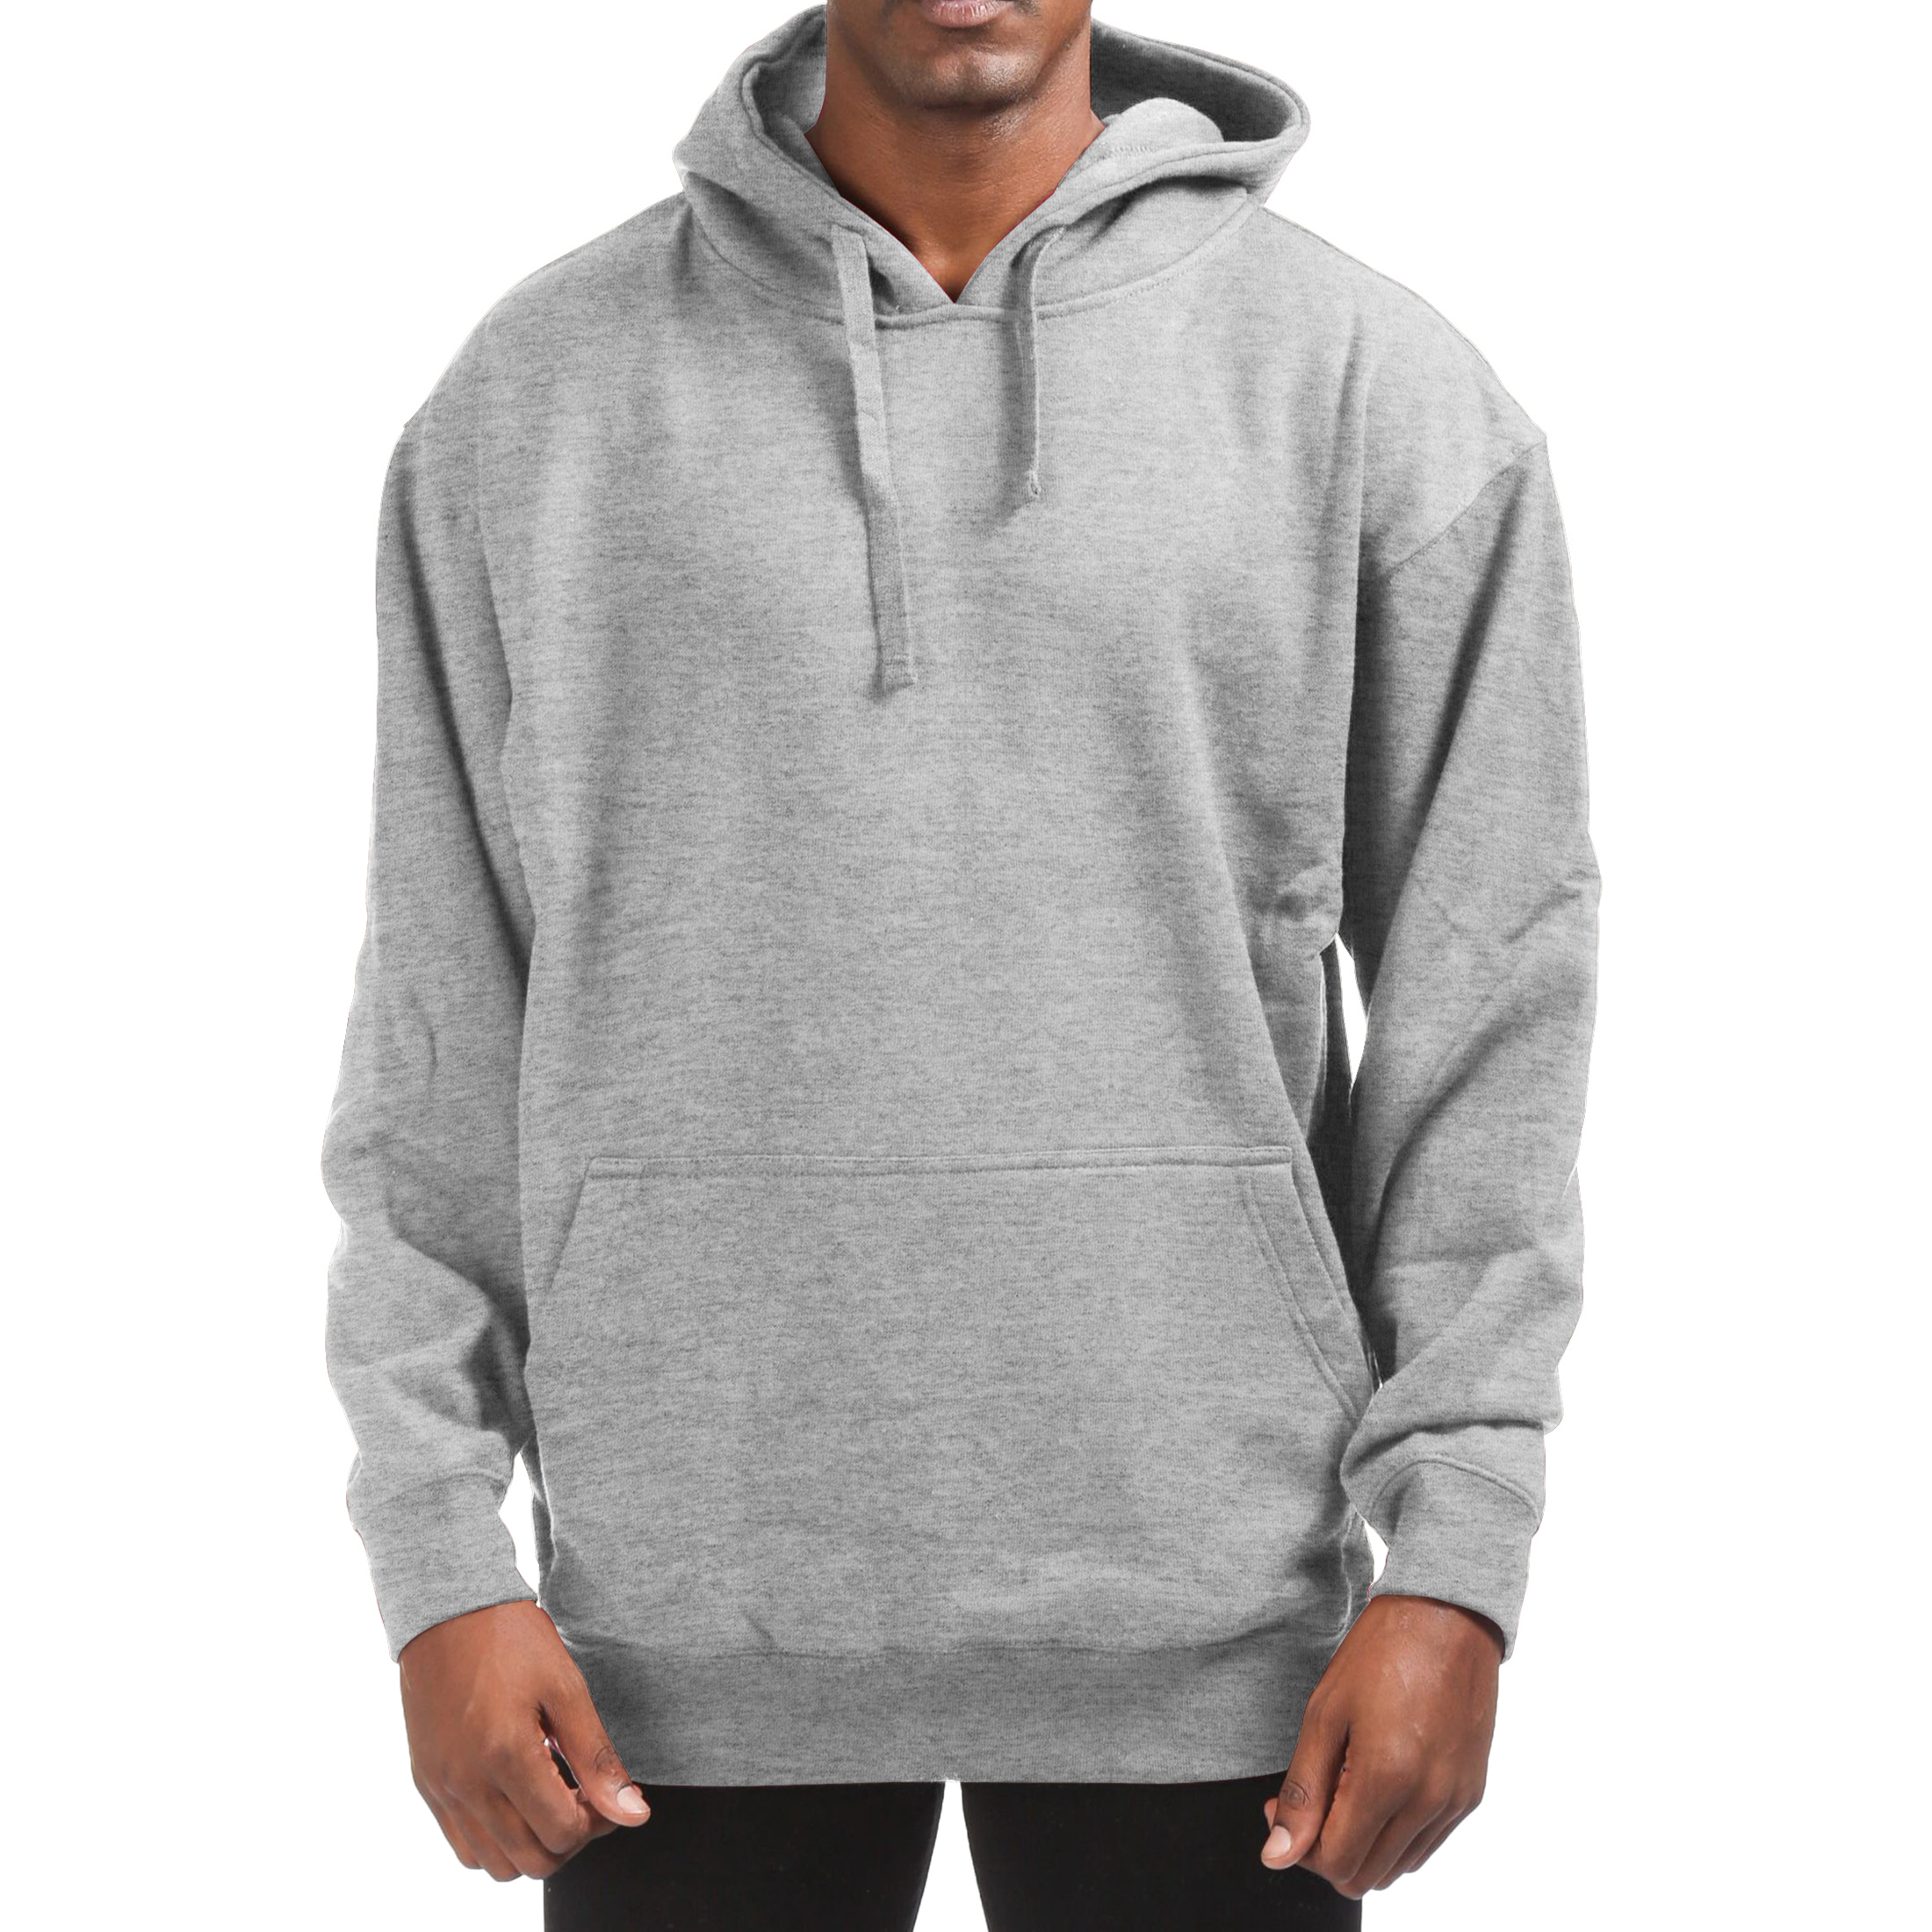 Men's Cotton-Blend Fleece Pullover Hoodie With Pocket (Big & Tall Sizes Available) - Gray, 4X-Large